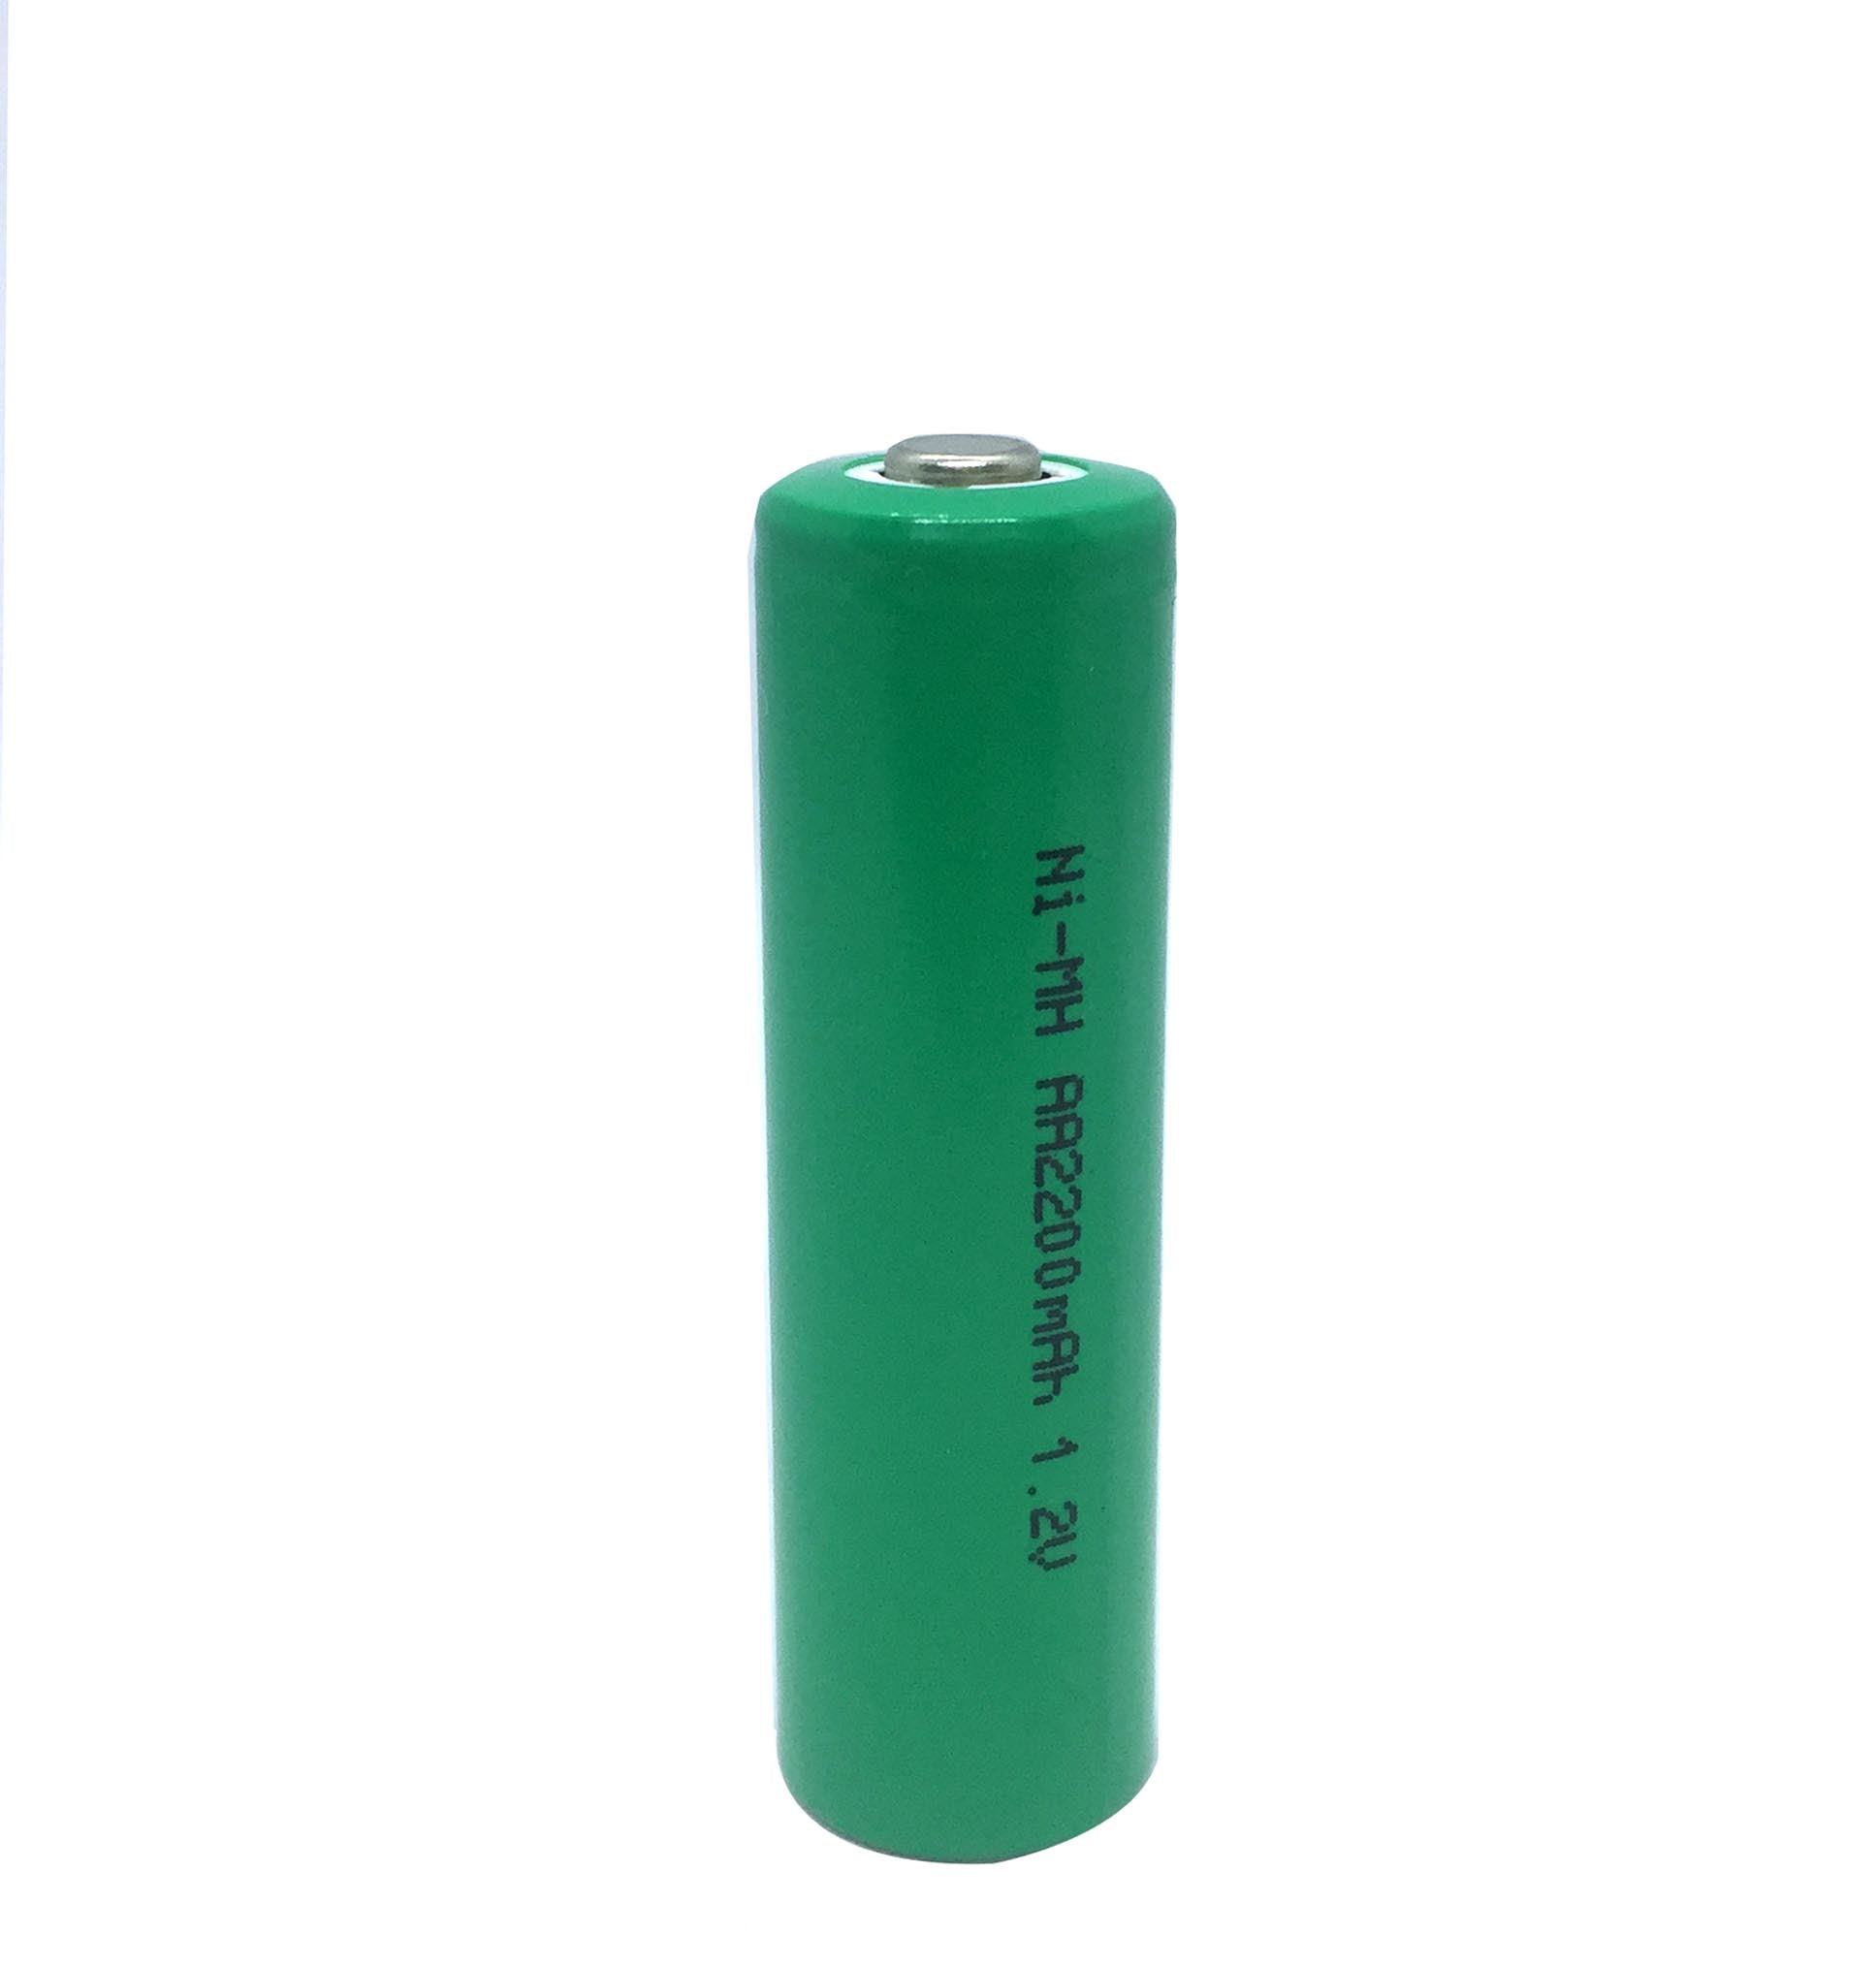 Rechargeable NiMH AA Battery: 1.2 V, 2200 mAh, 1 cell